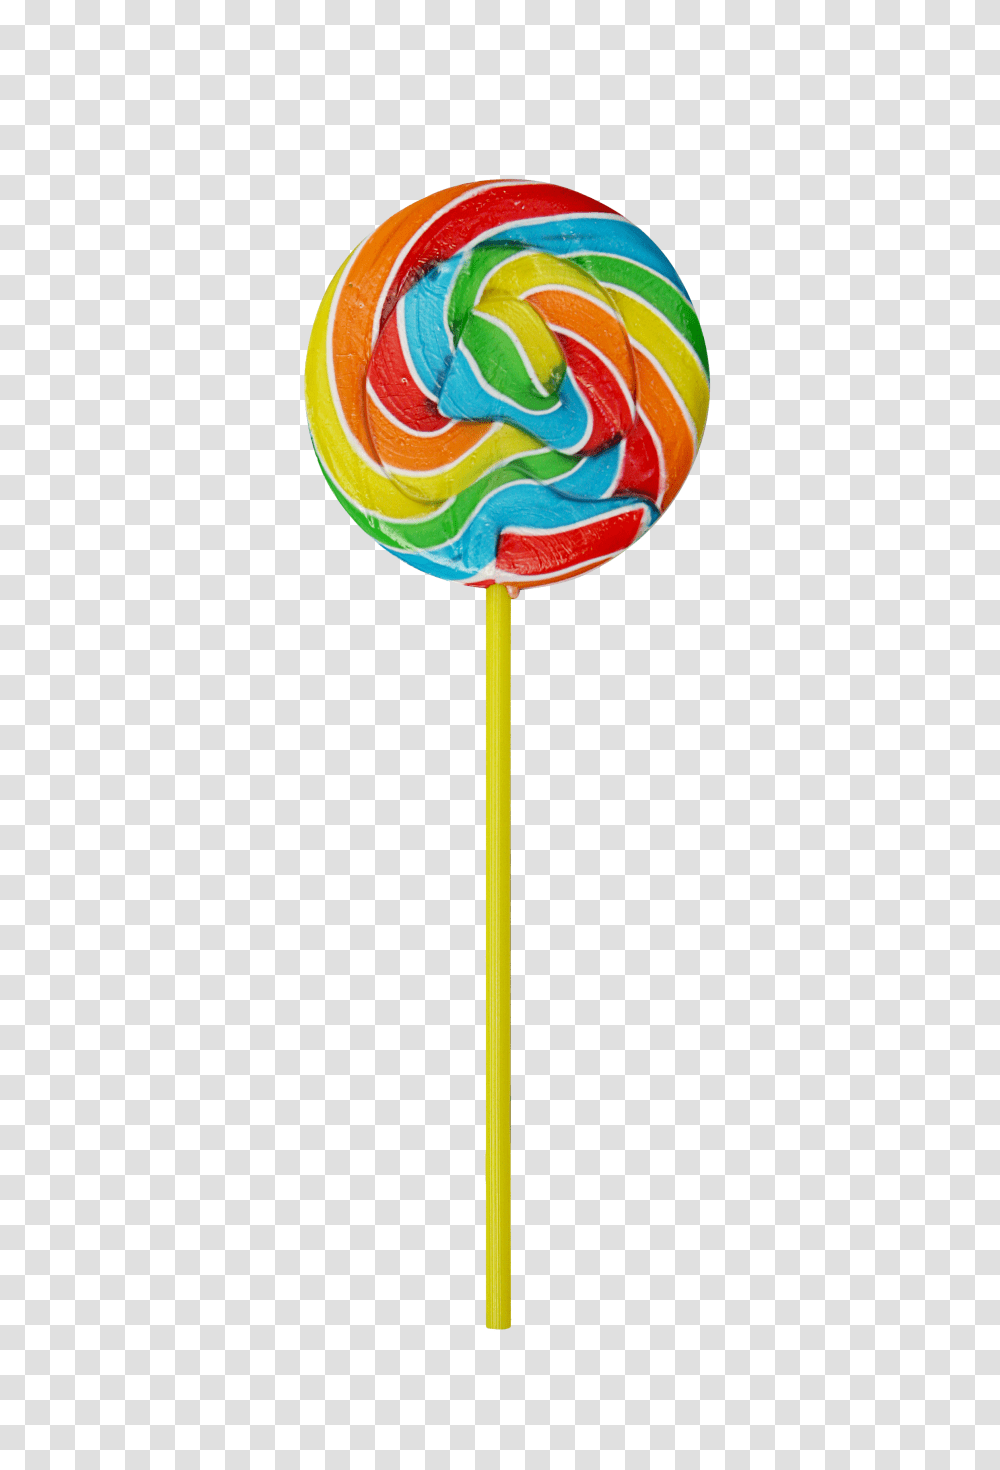 Lollipop Hd Background, Food, Candy, Balloon Transparent Png